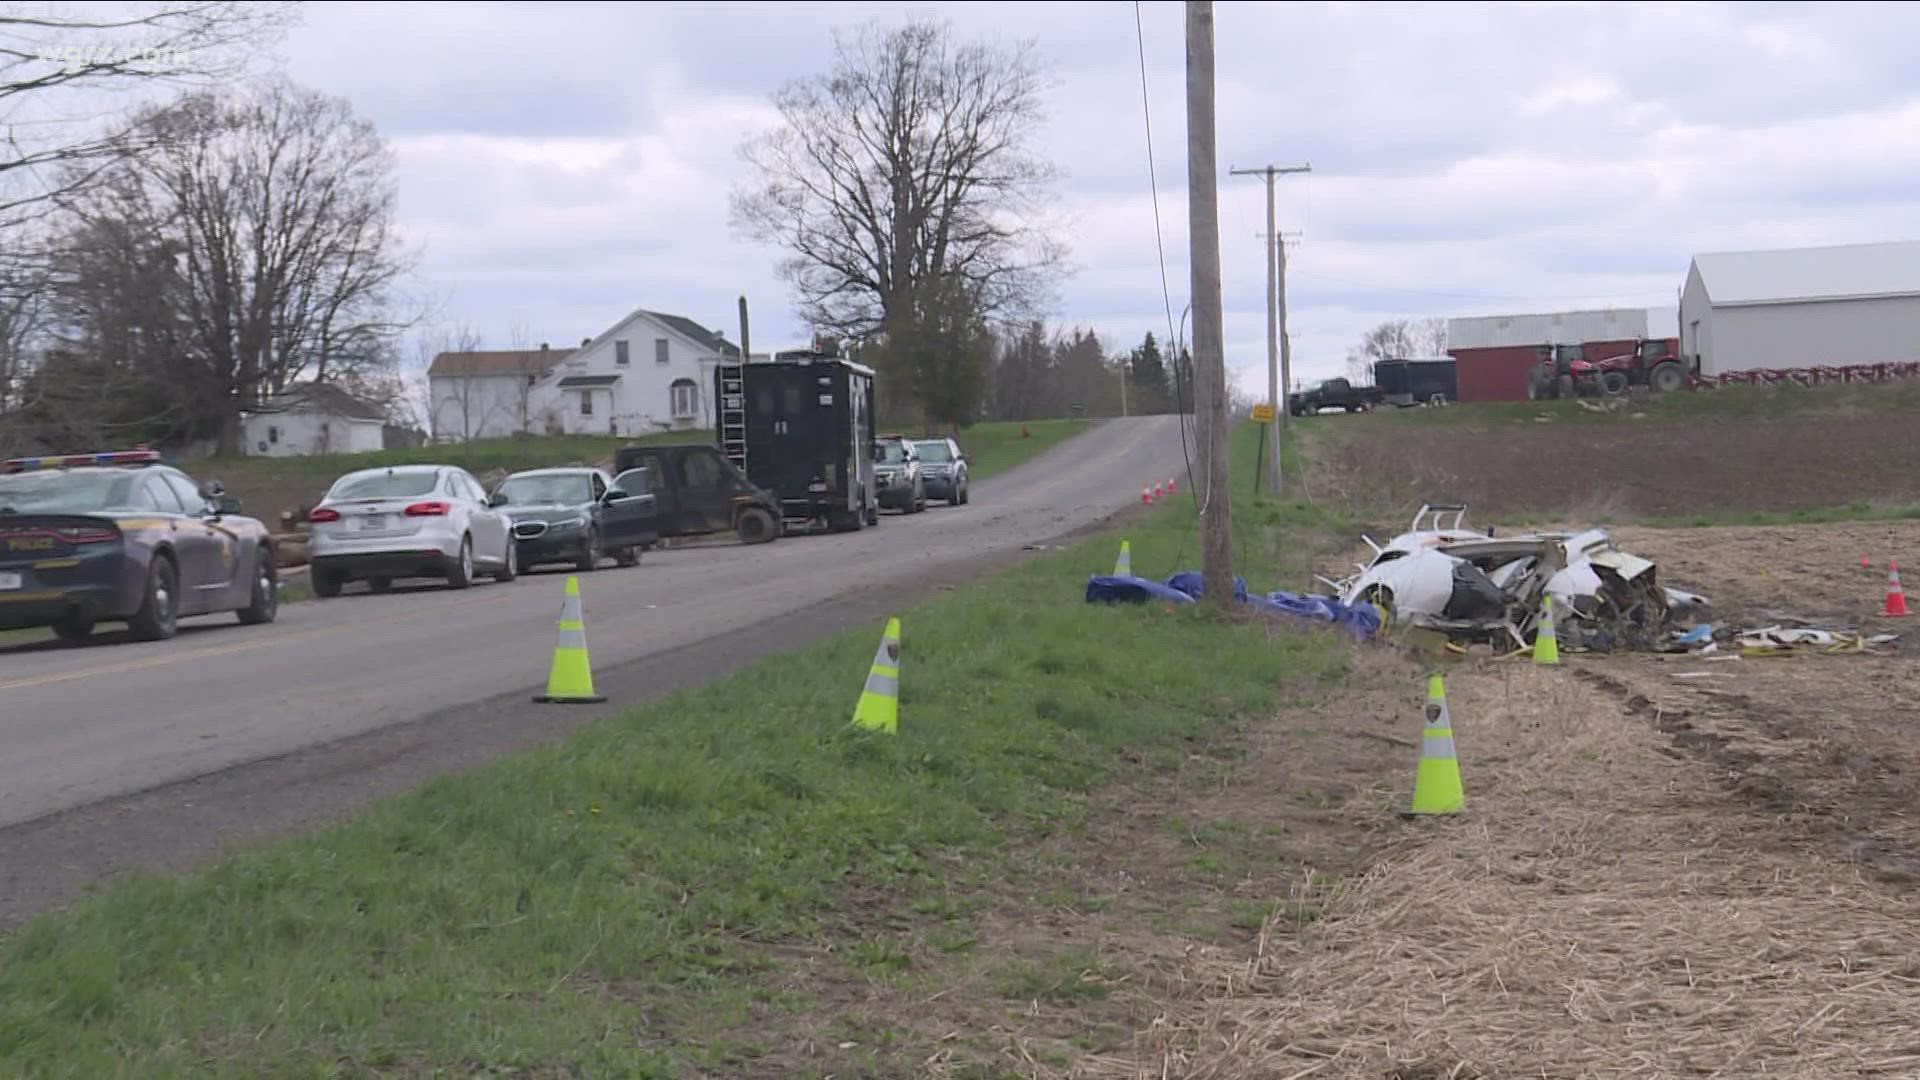 The investigation continues in Genesee County into what caused a Mercy Flight helicopter to come crashing down, killing two people on board.